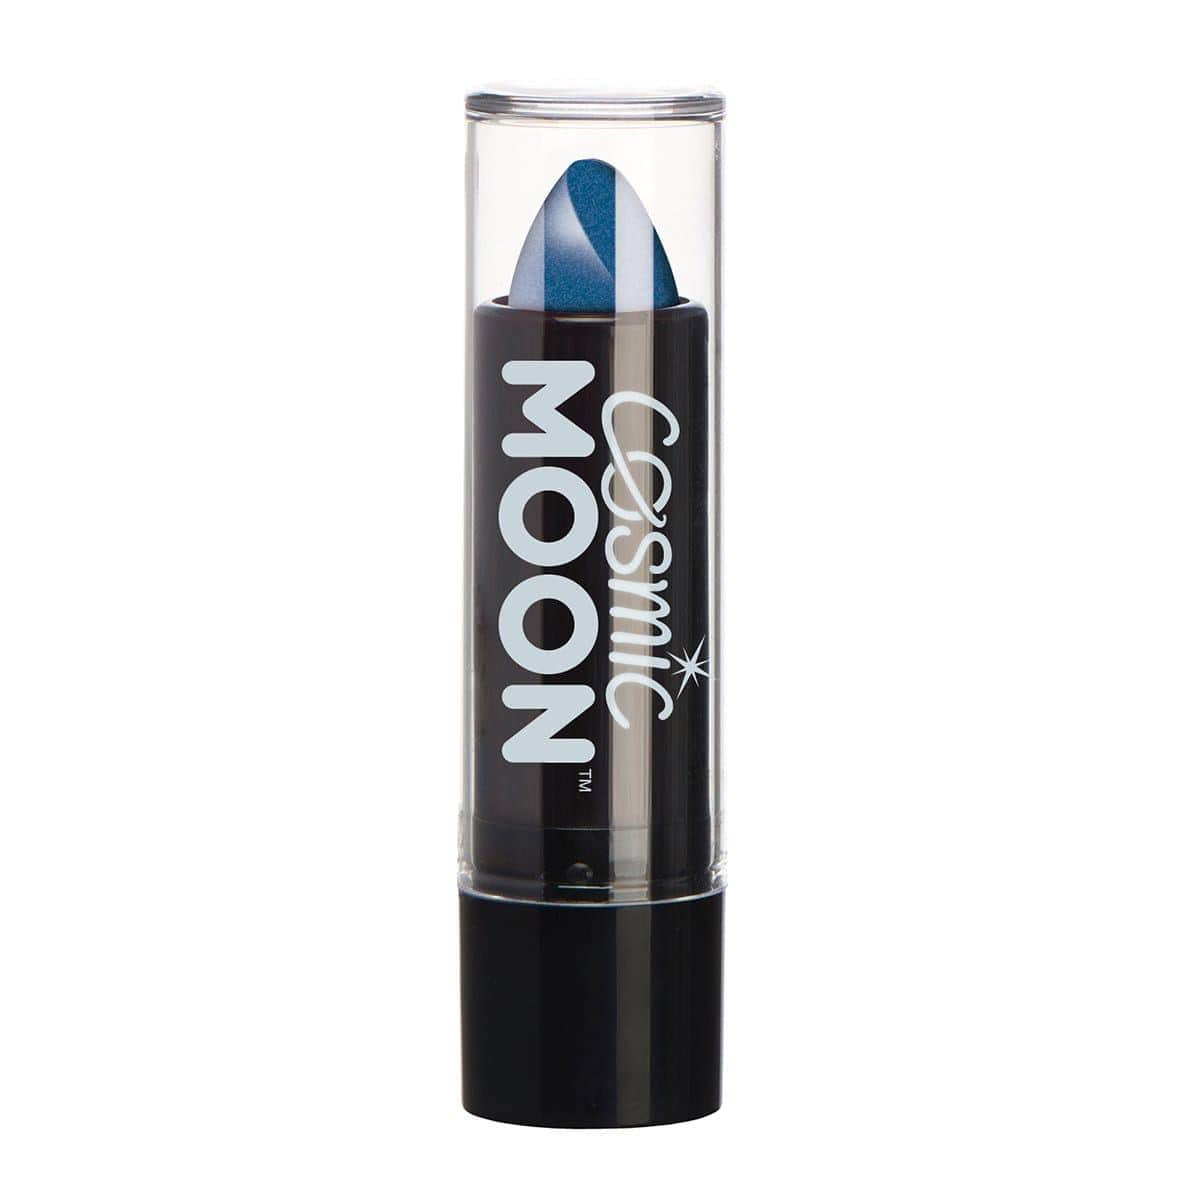 Buy Costume Accessories Moon blue metallic lipstick sold at Party Expert